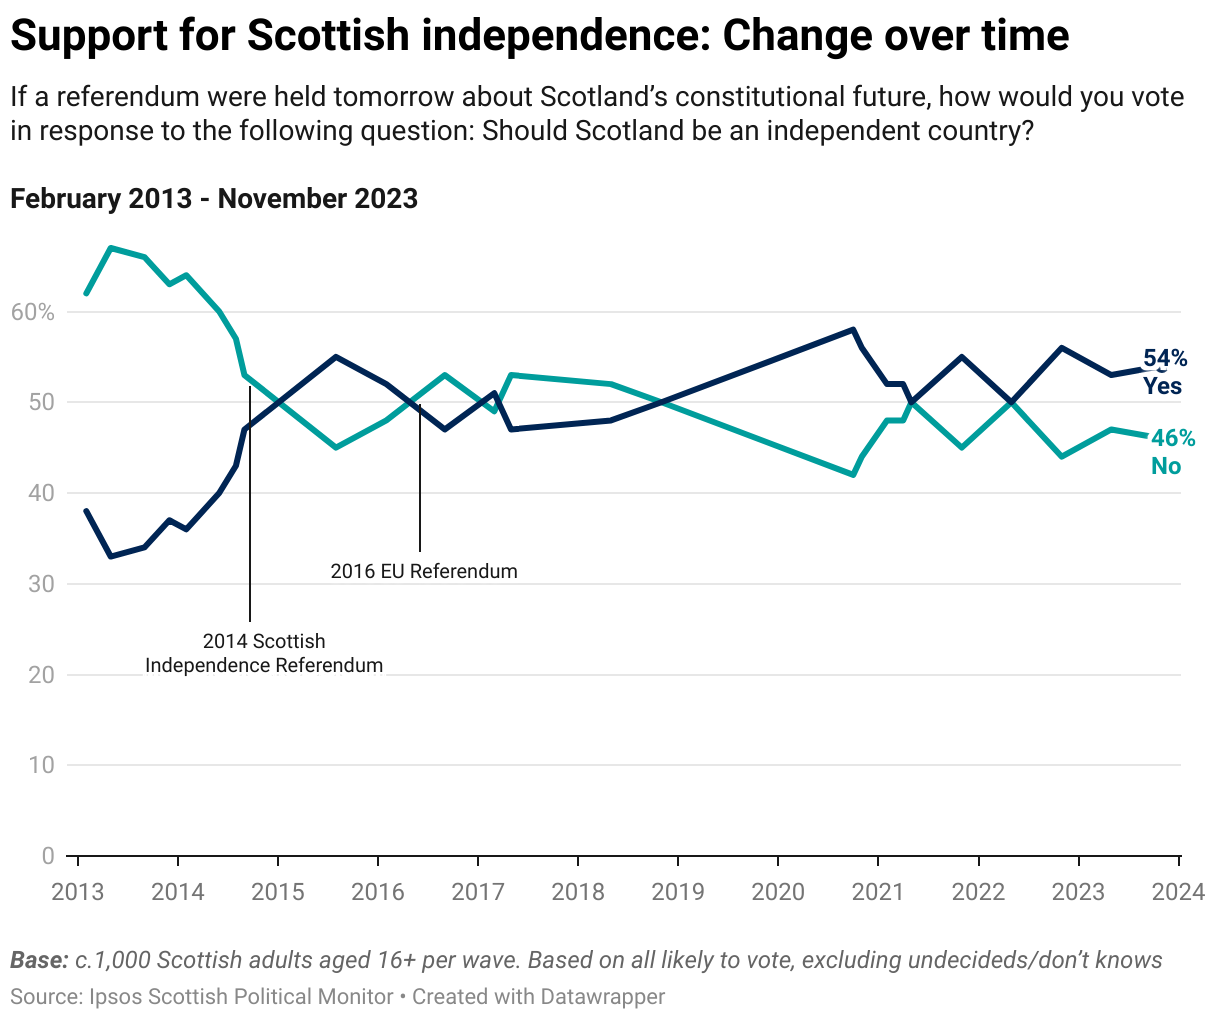 Support for Scottish independence: Change over time. If a referendum were held tomorrow about Scotland’s constitutional future, how would you vote in response to the following question: Should Scotland be an independent country? Yes 54% No 46% (November 2023)